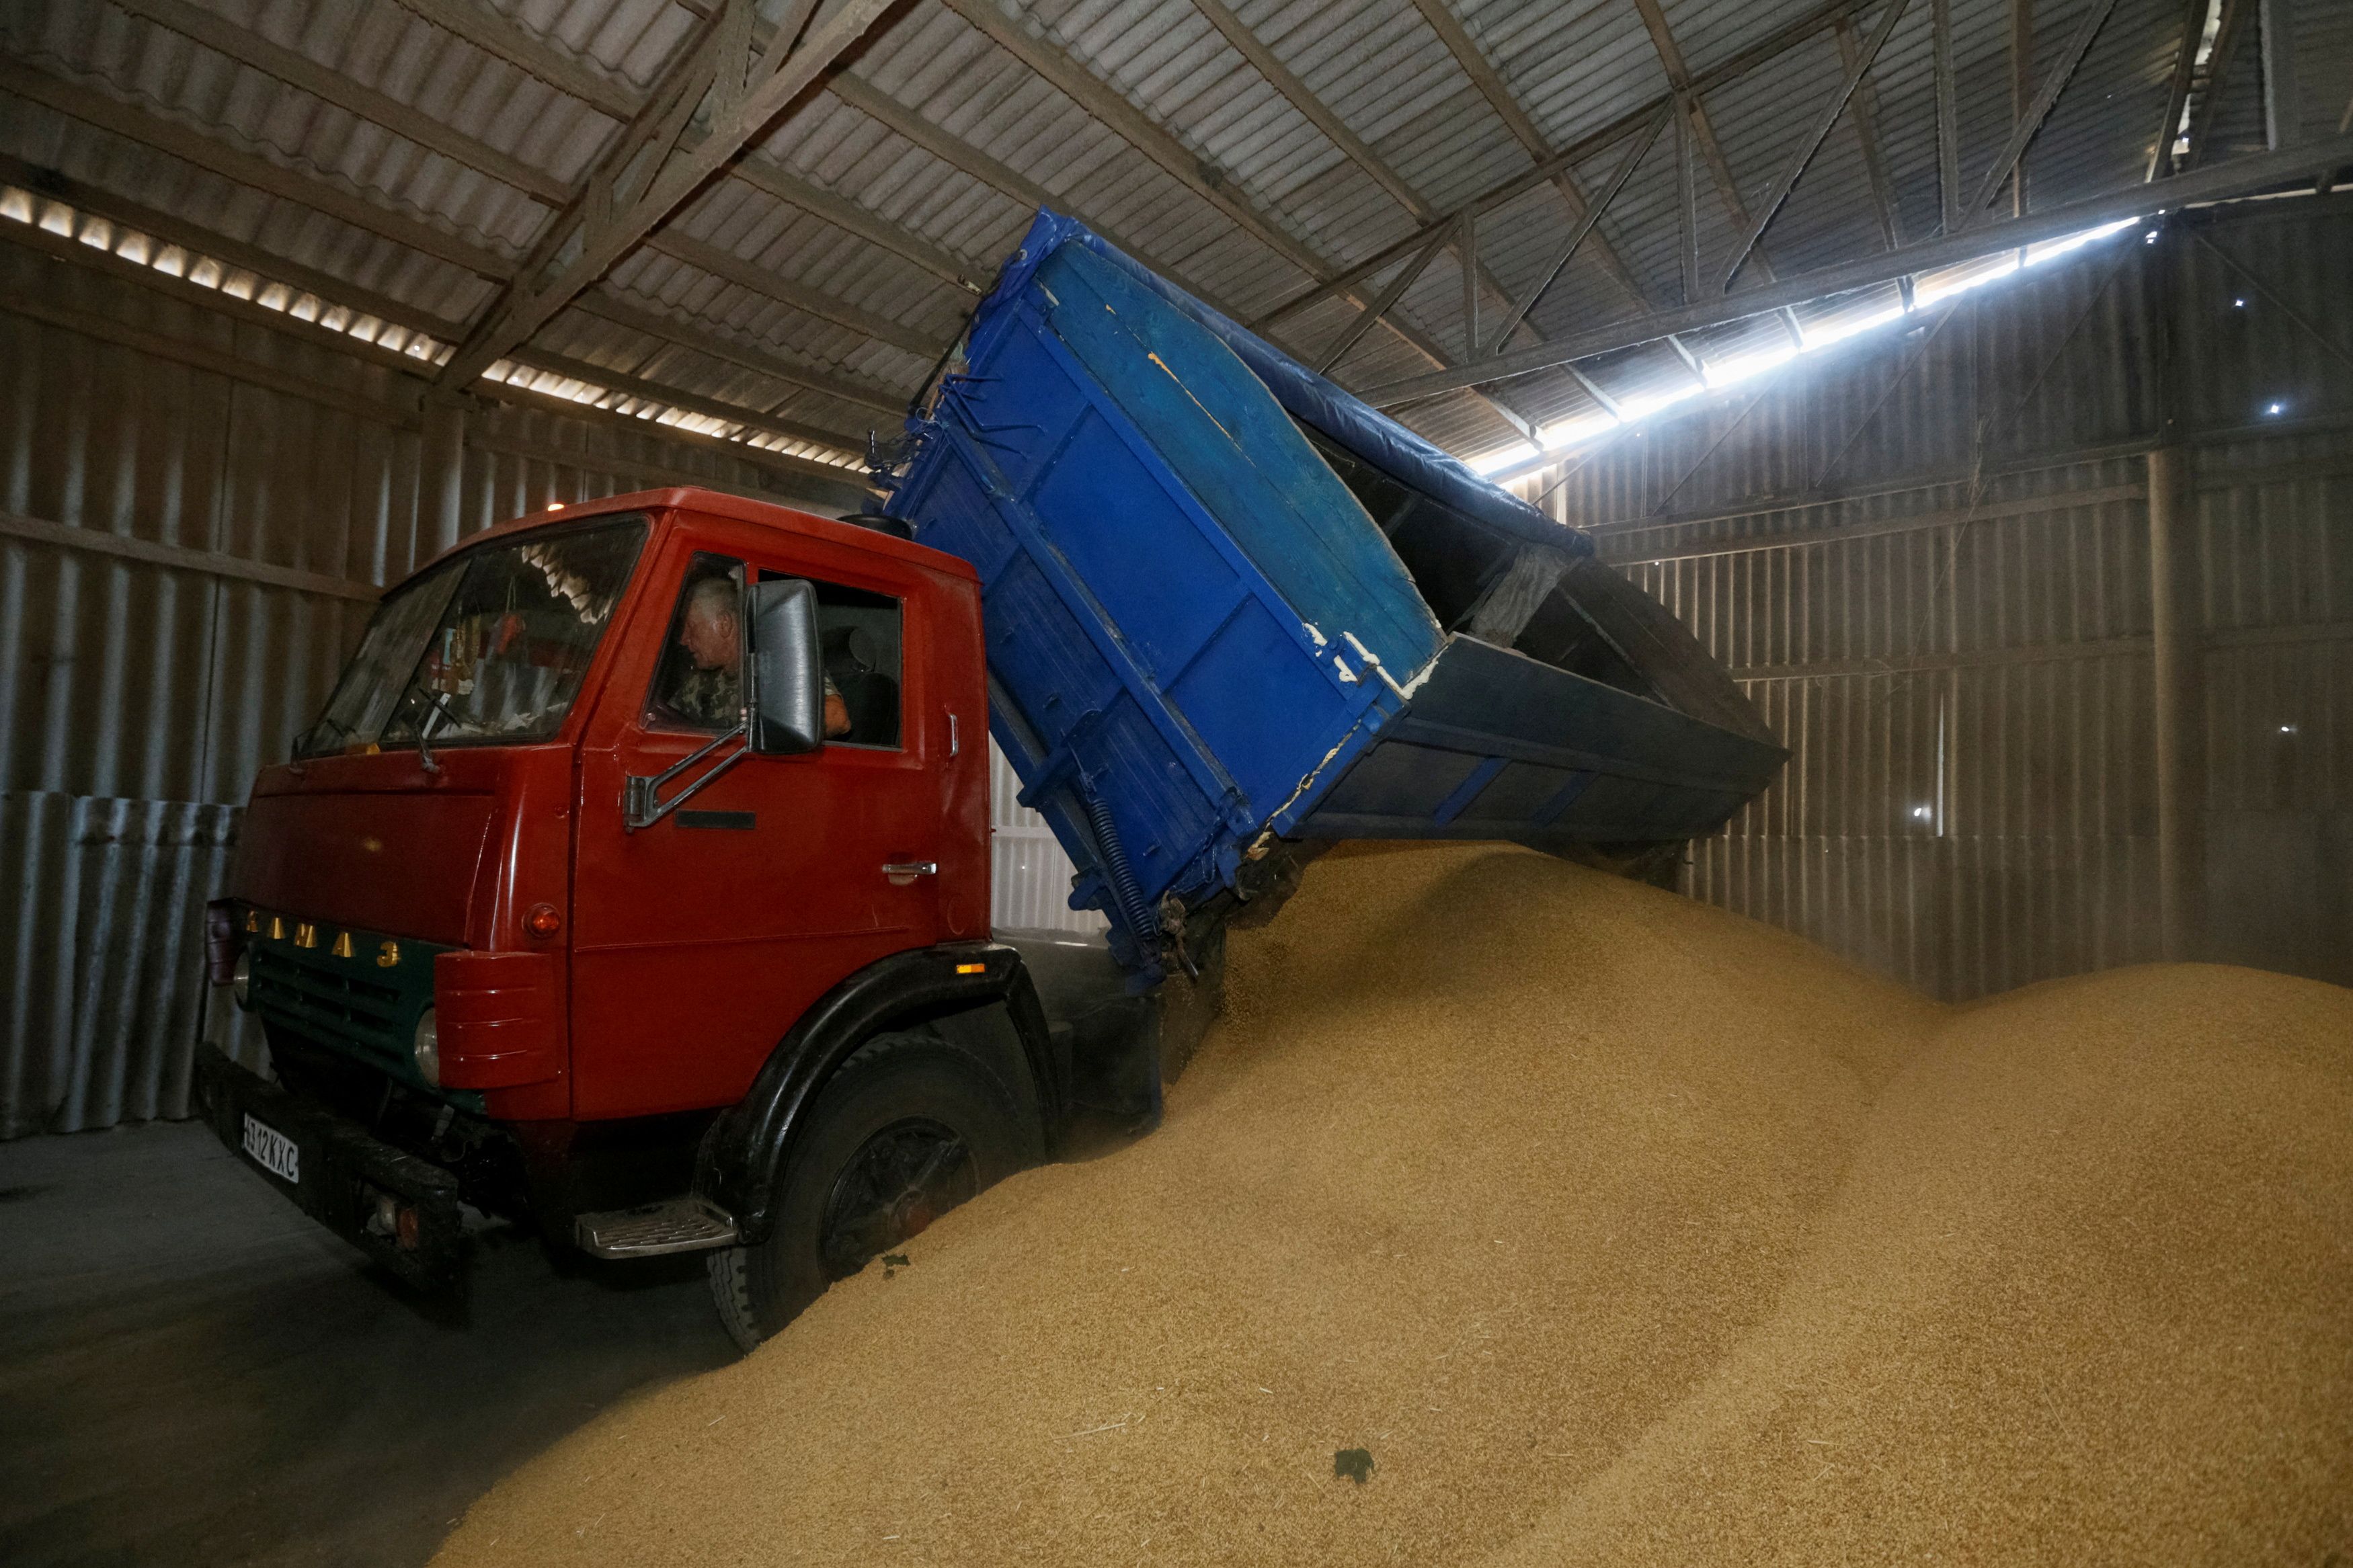 A truck unloads at a grain store during barley harvesting in the Kiev region in 2016